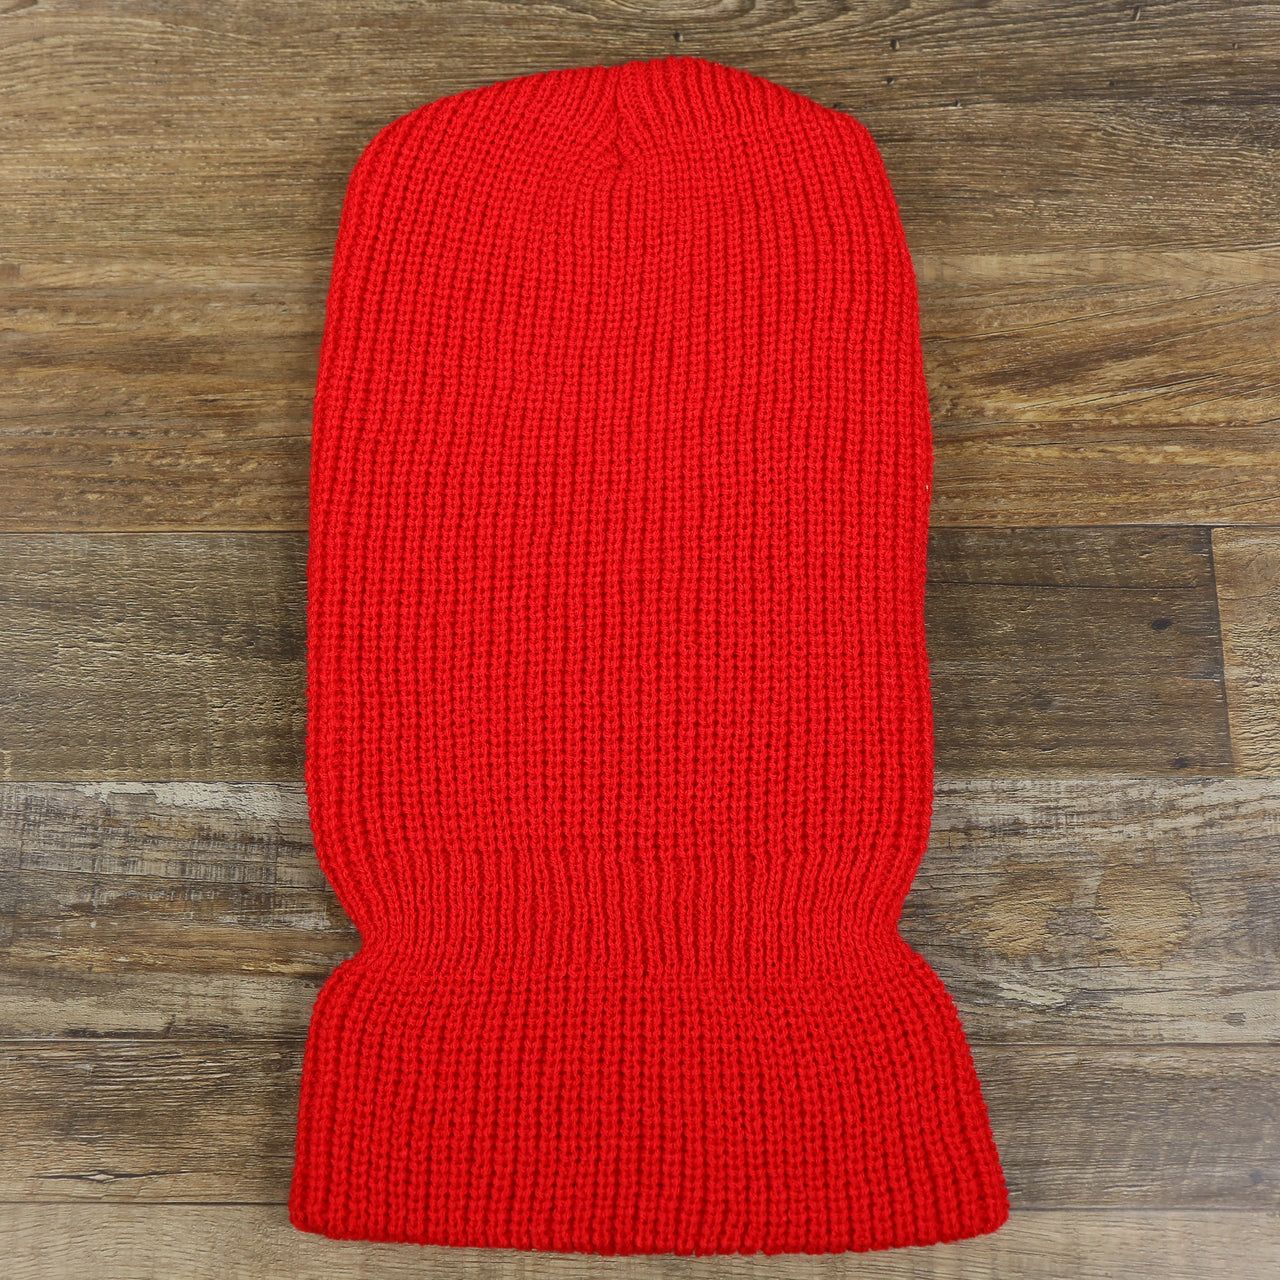 The backside of the Cardinal Red Blank Three Hole Winter Knit Ski Mask | Red Ski Mask